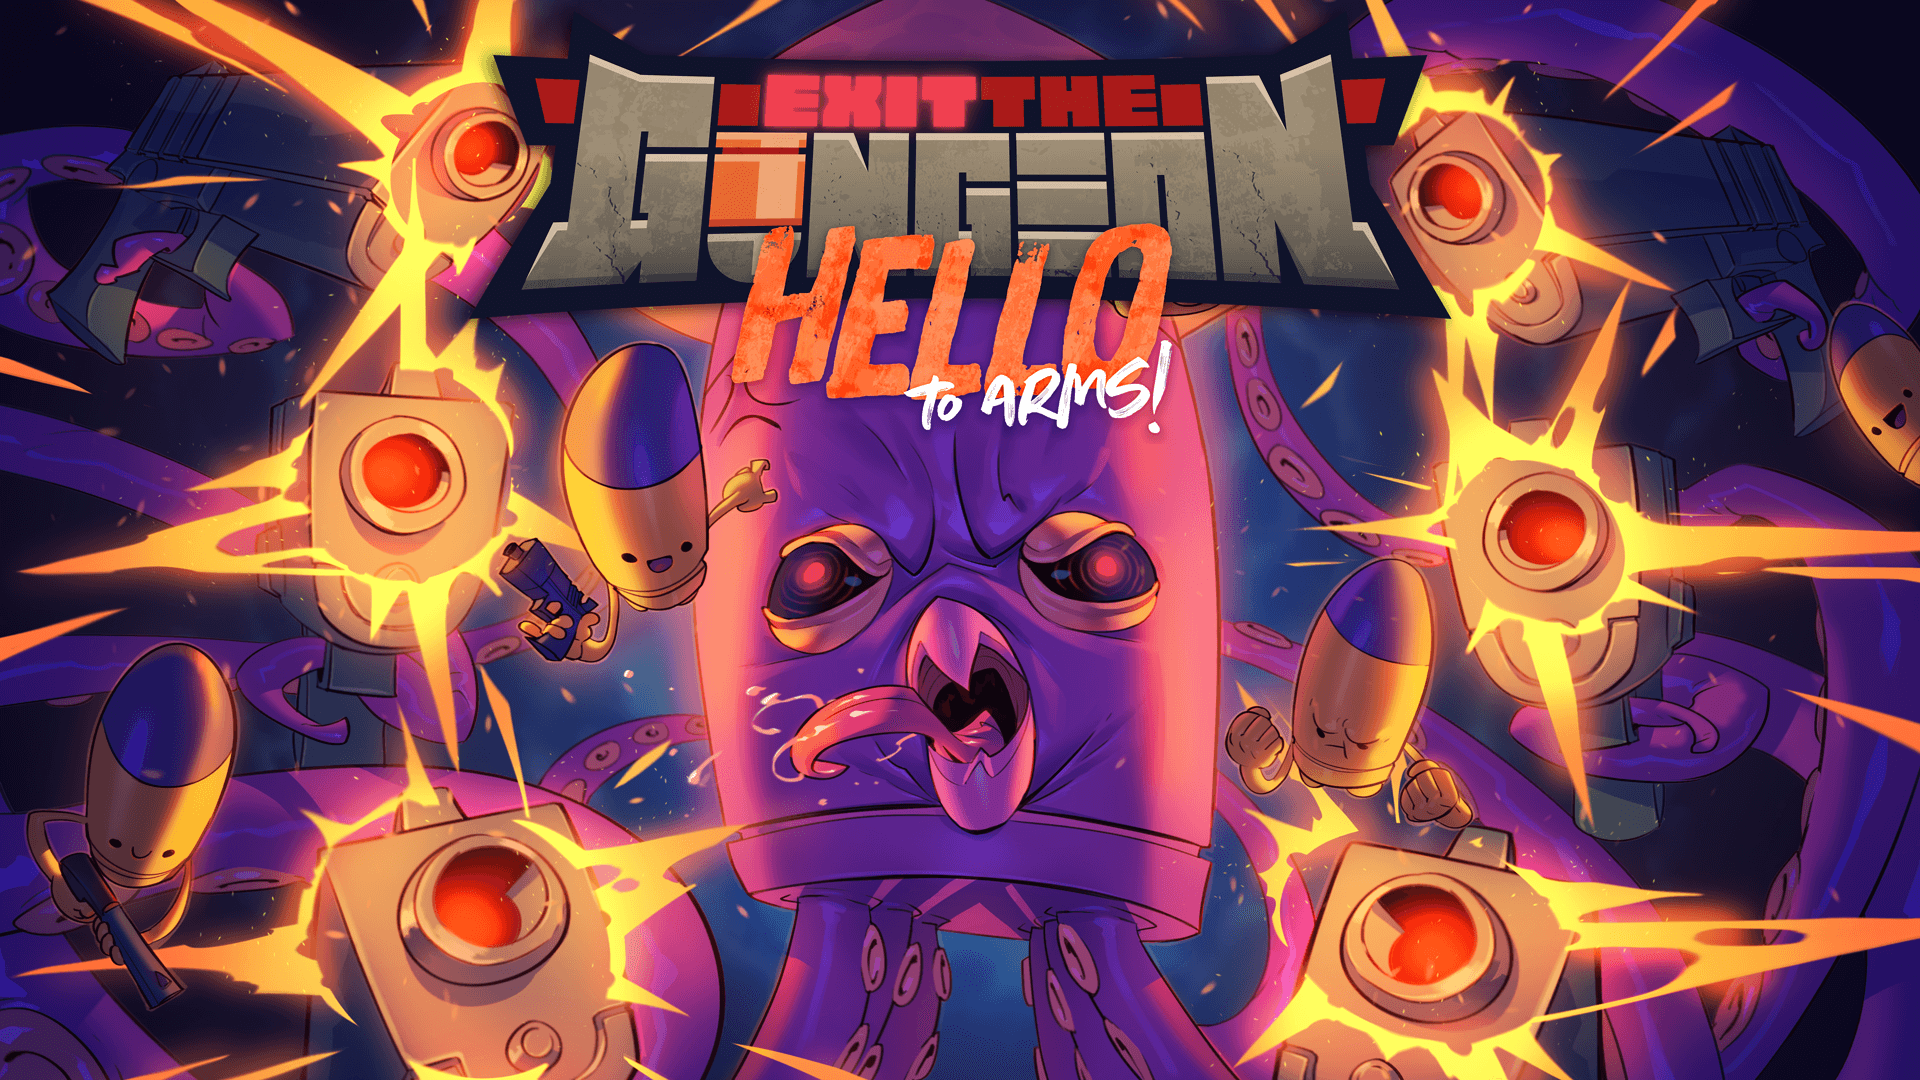 Exit the Gungeon: Hello to Arms